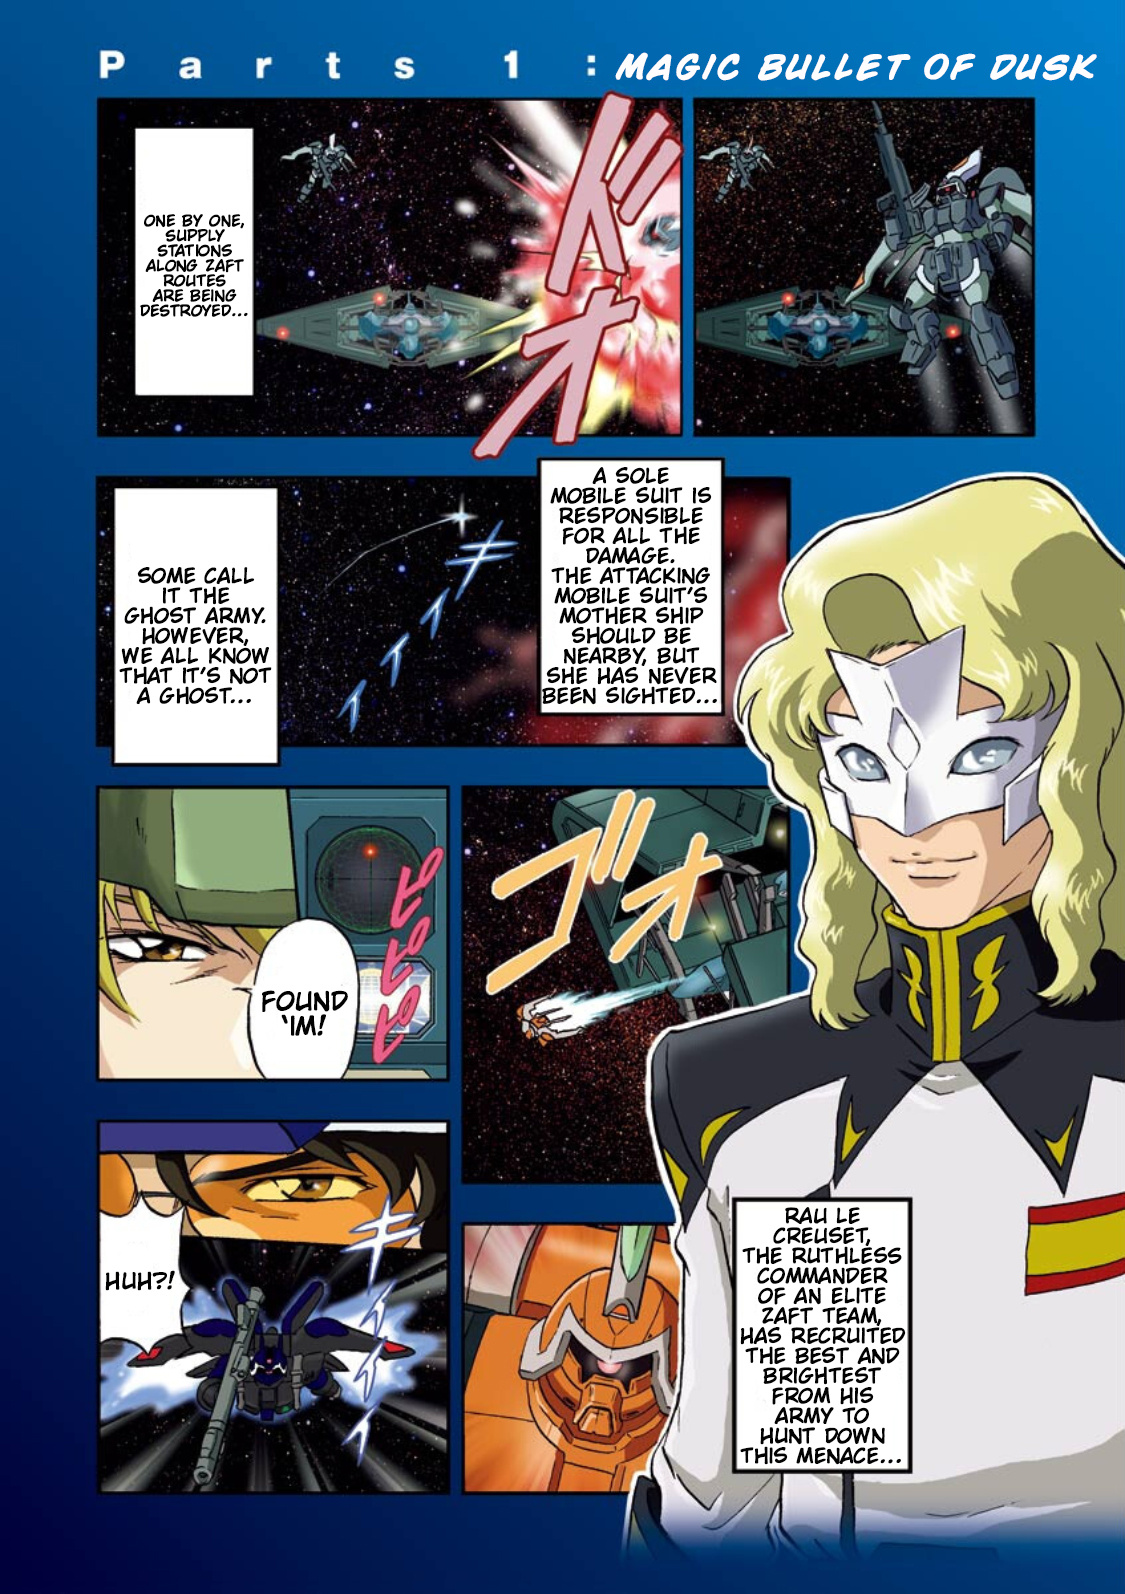 Mobile Suit Gundam Seed Astray Re:master Edition Vol.1 Chapter 1: Magic Bullet Of Dusk - Picture 1